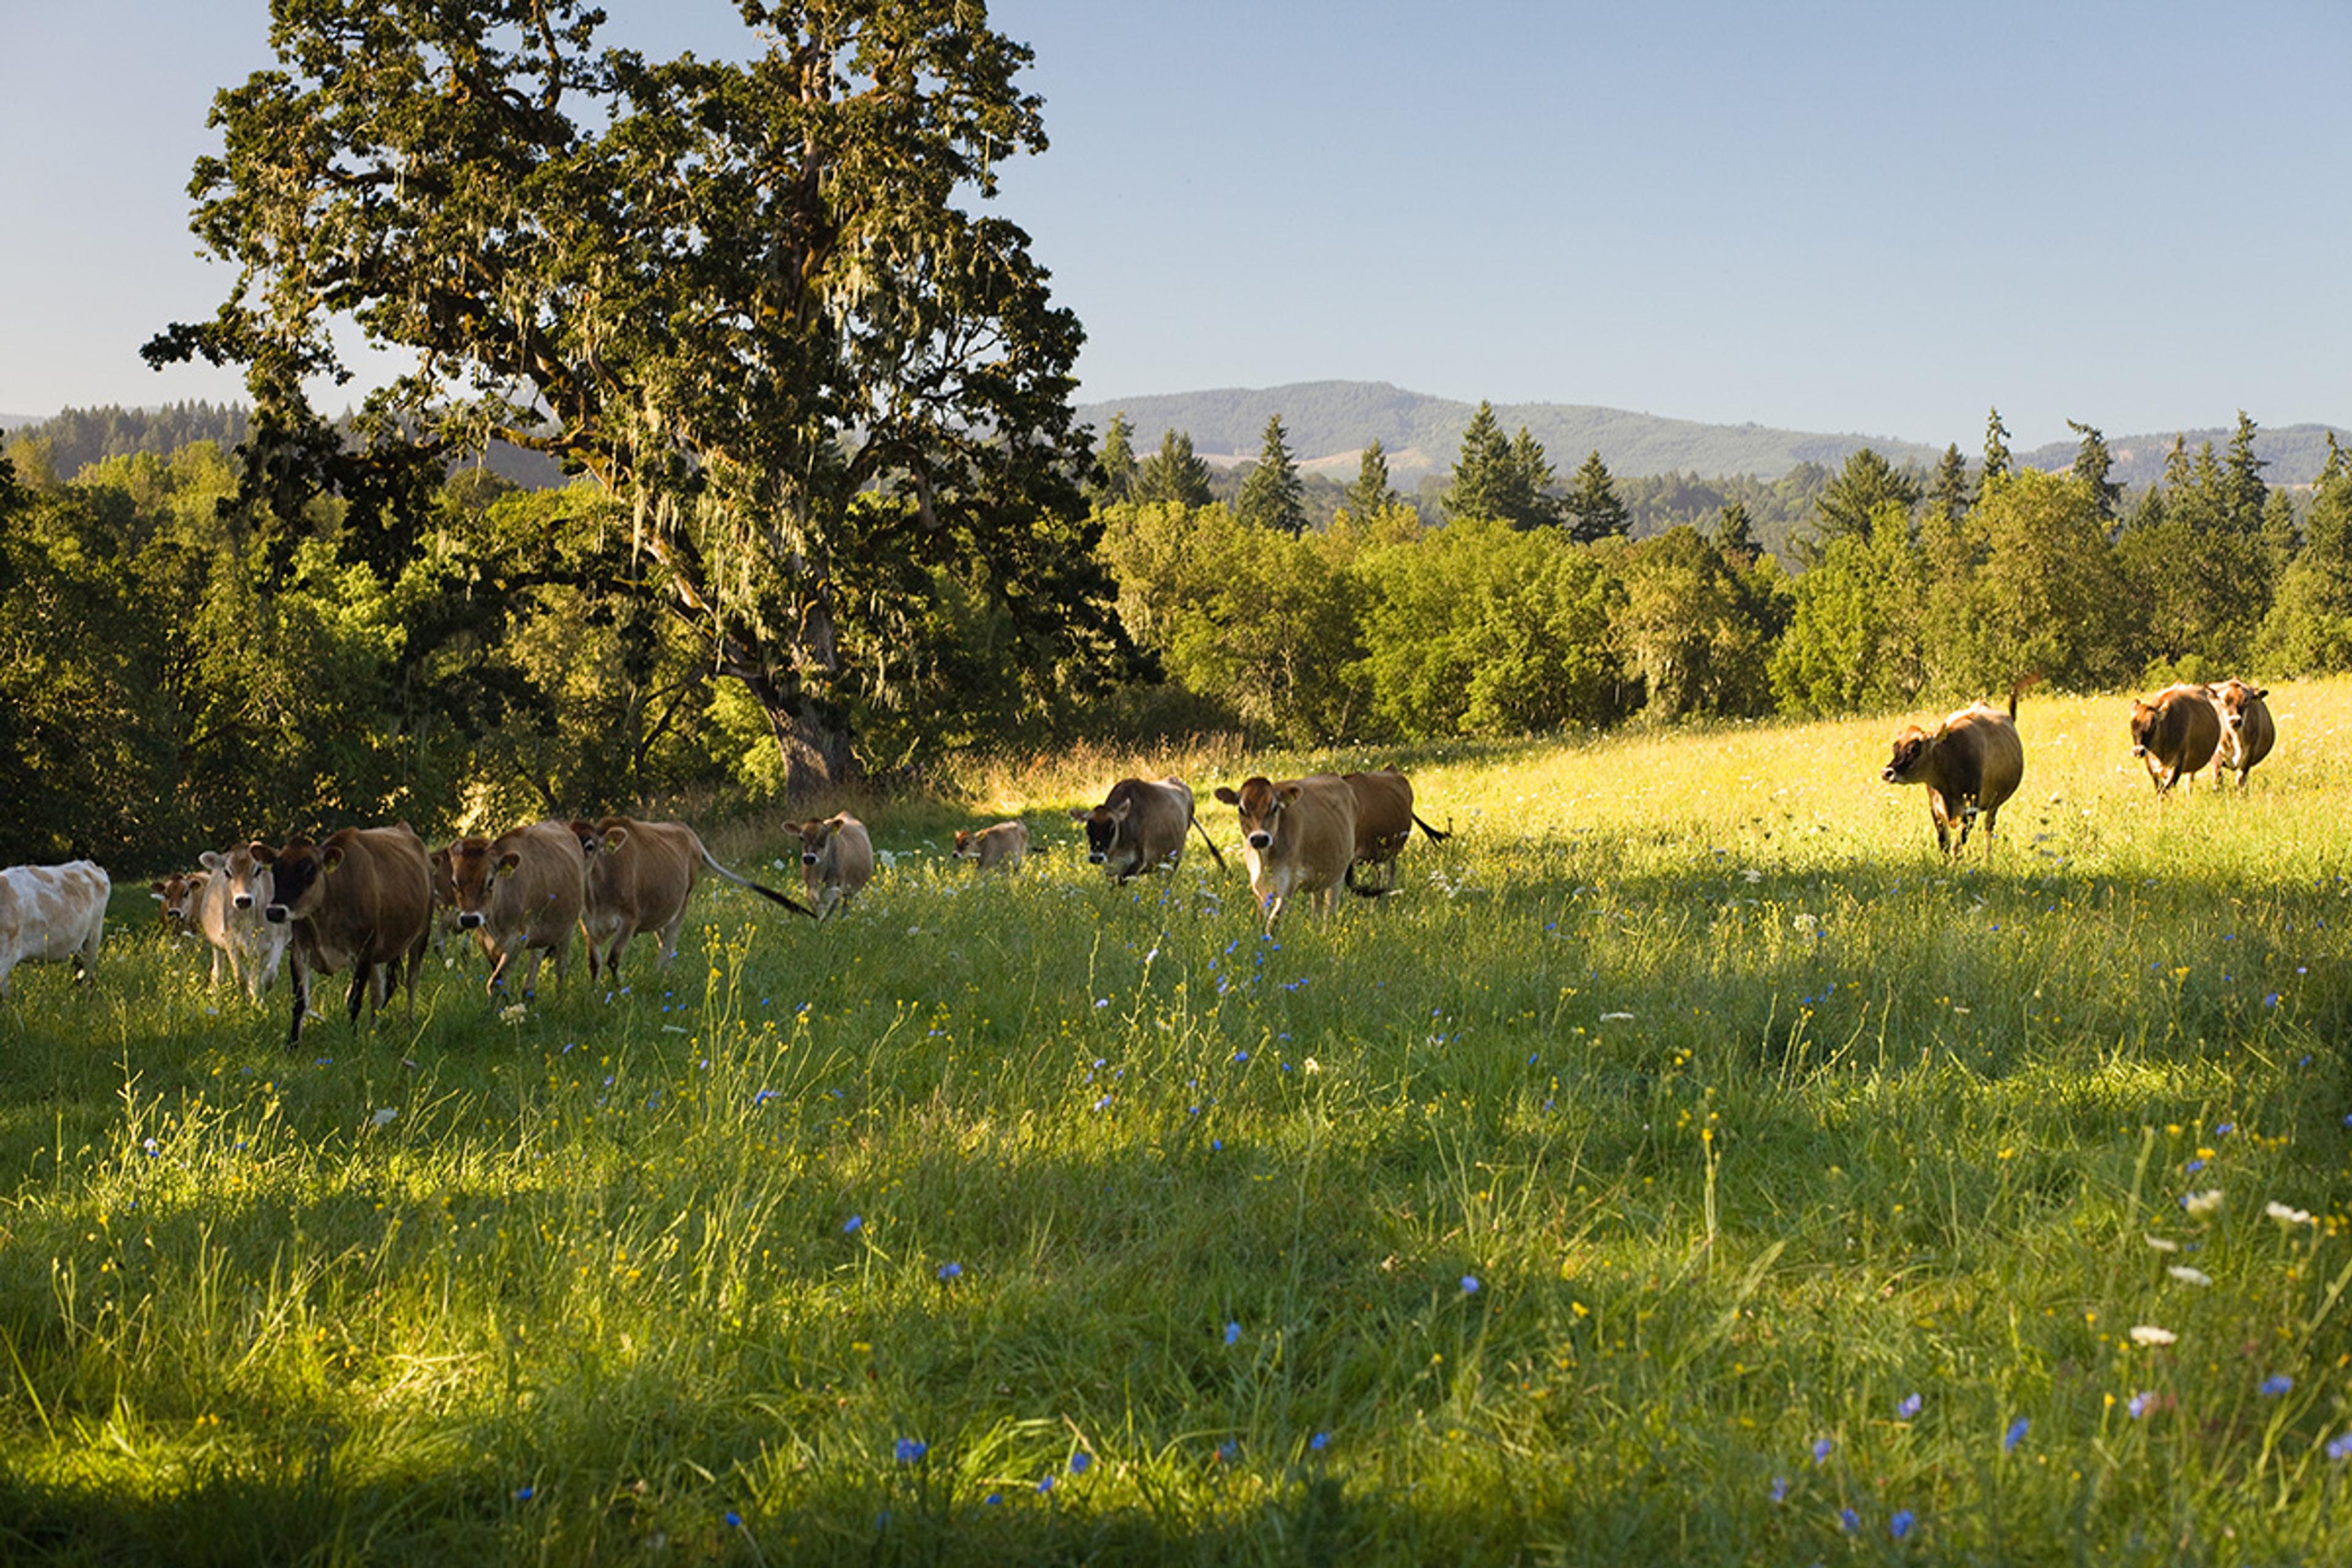 A group of Jersey cows walking on a pasture with trees and hills in the background.